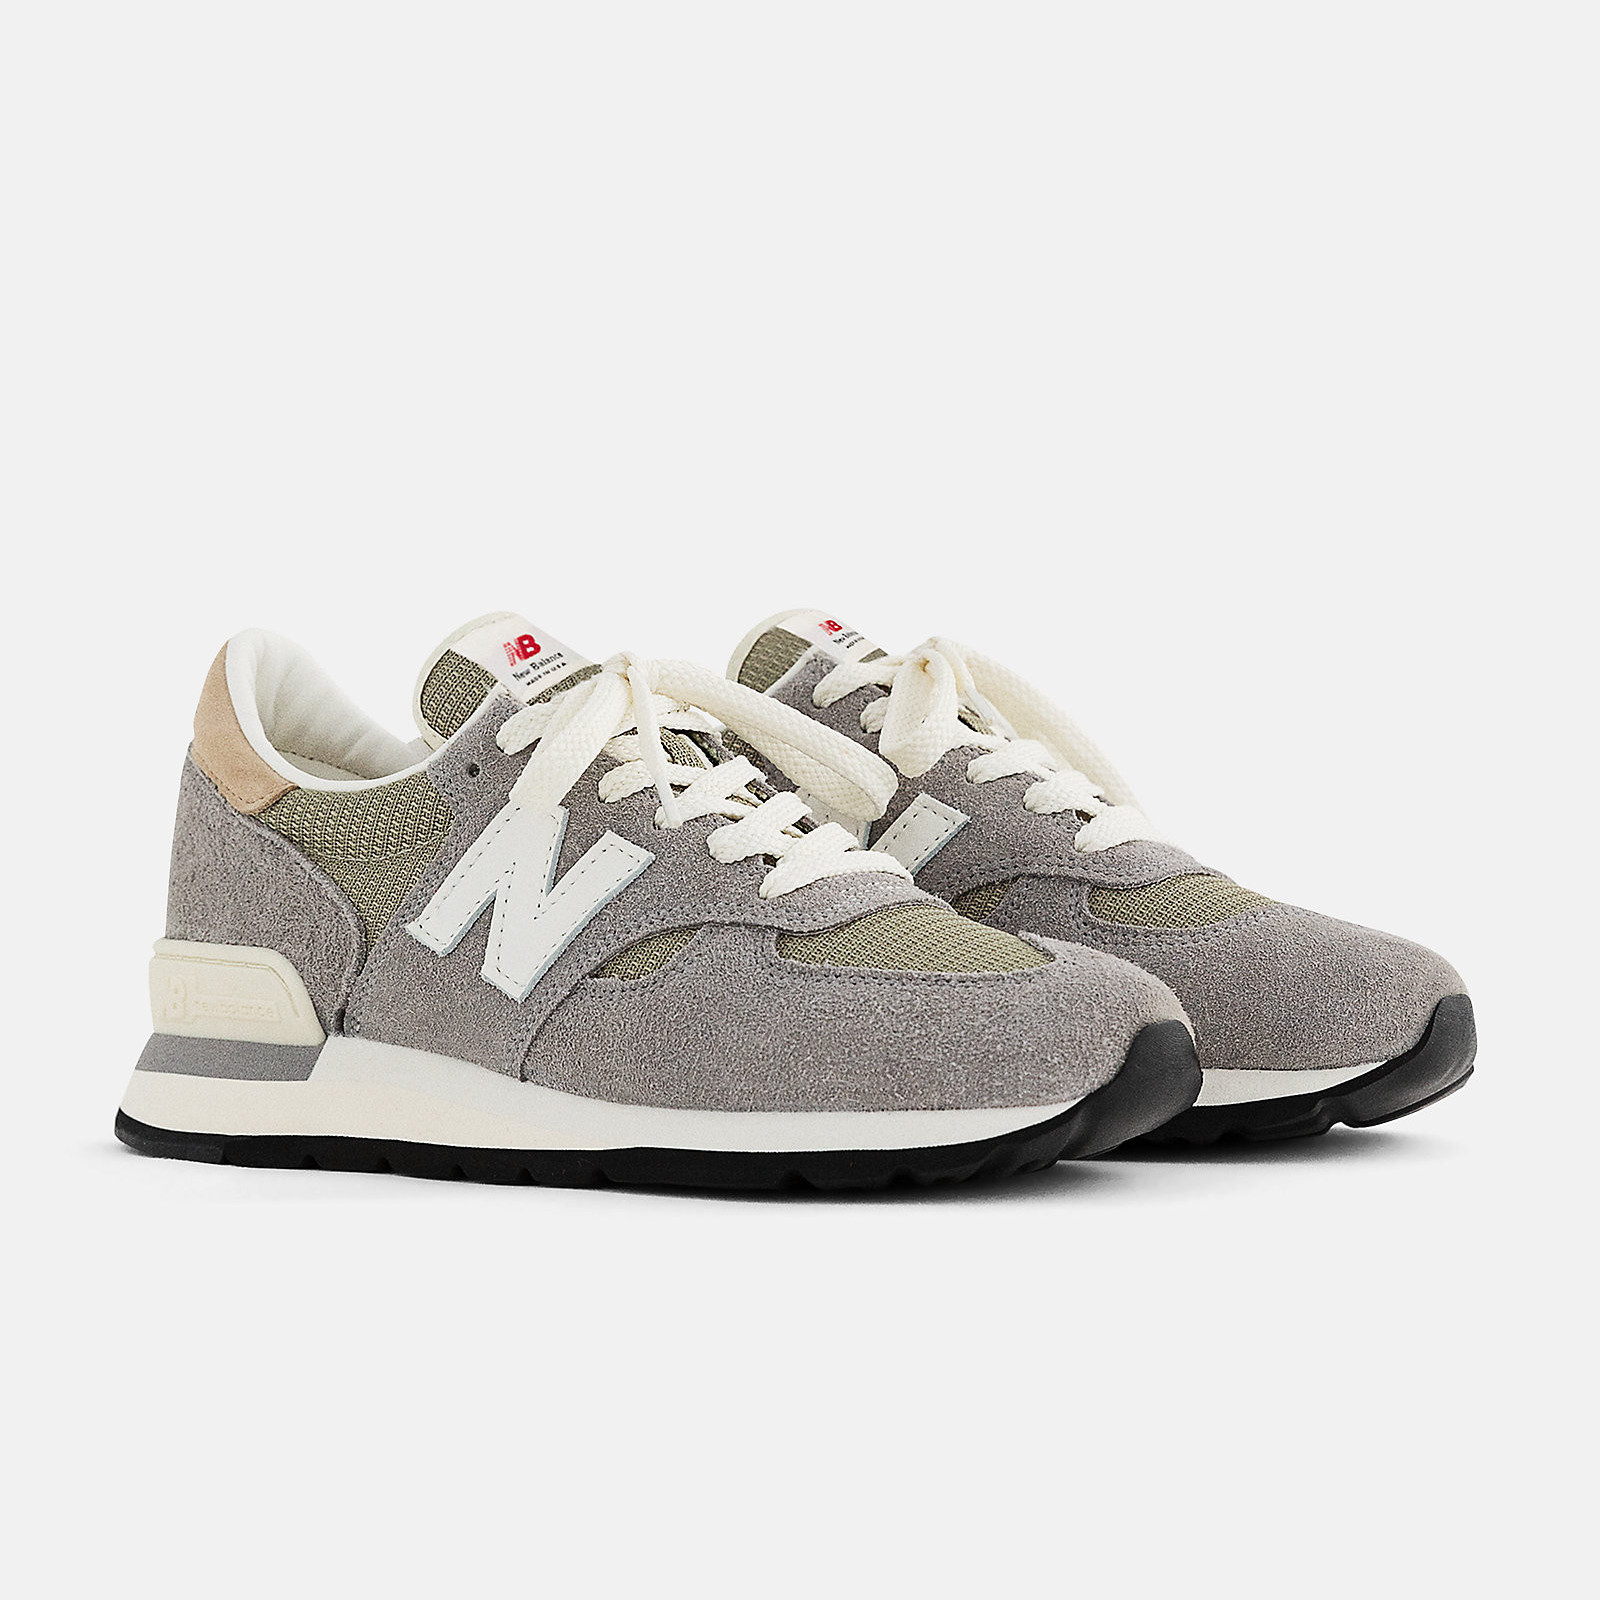 New Balance 990v1
Made In USA
« Marblehead »